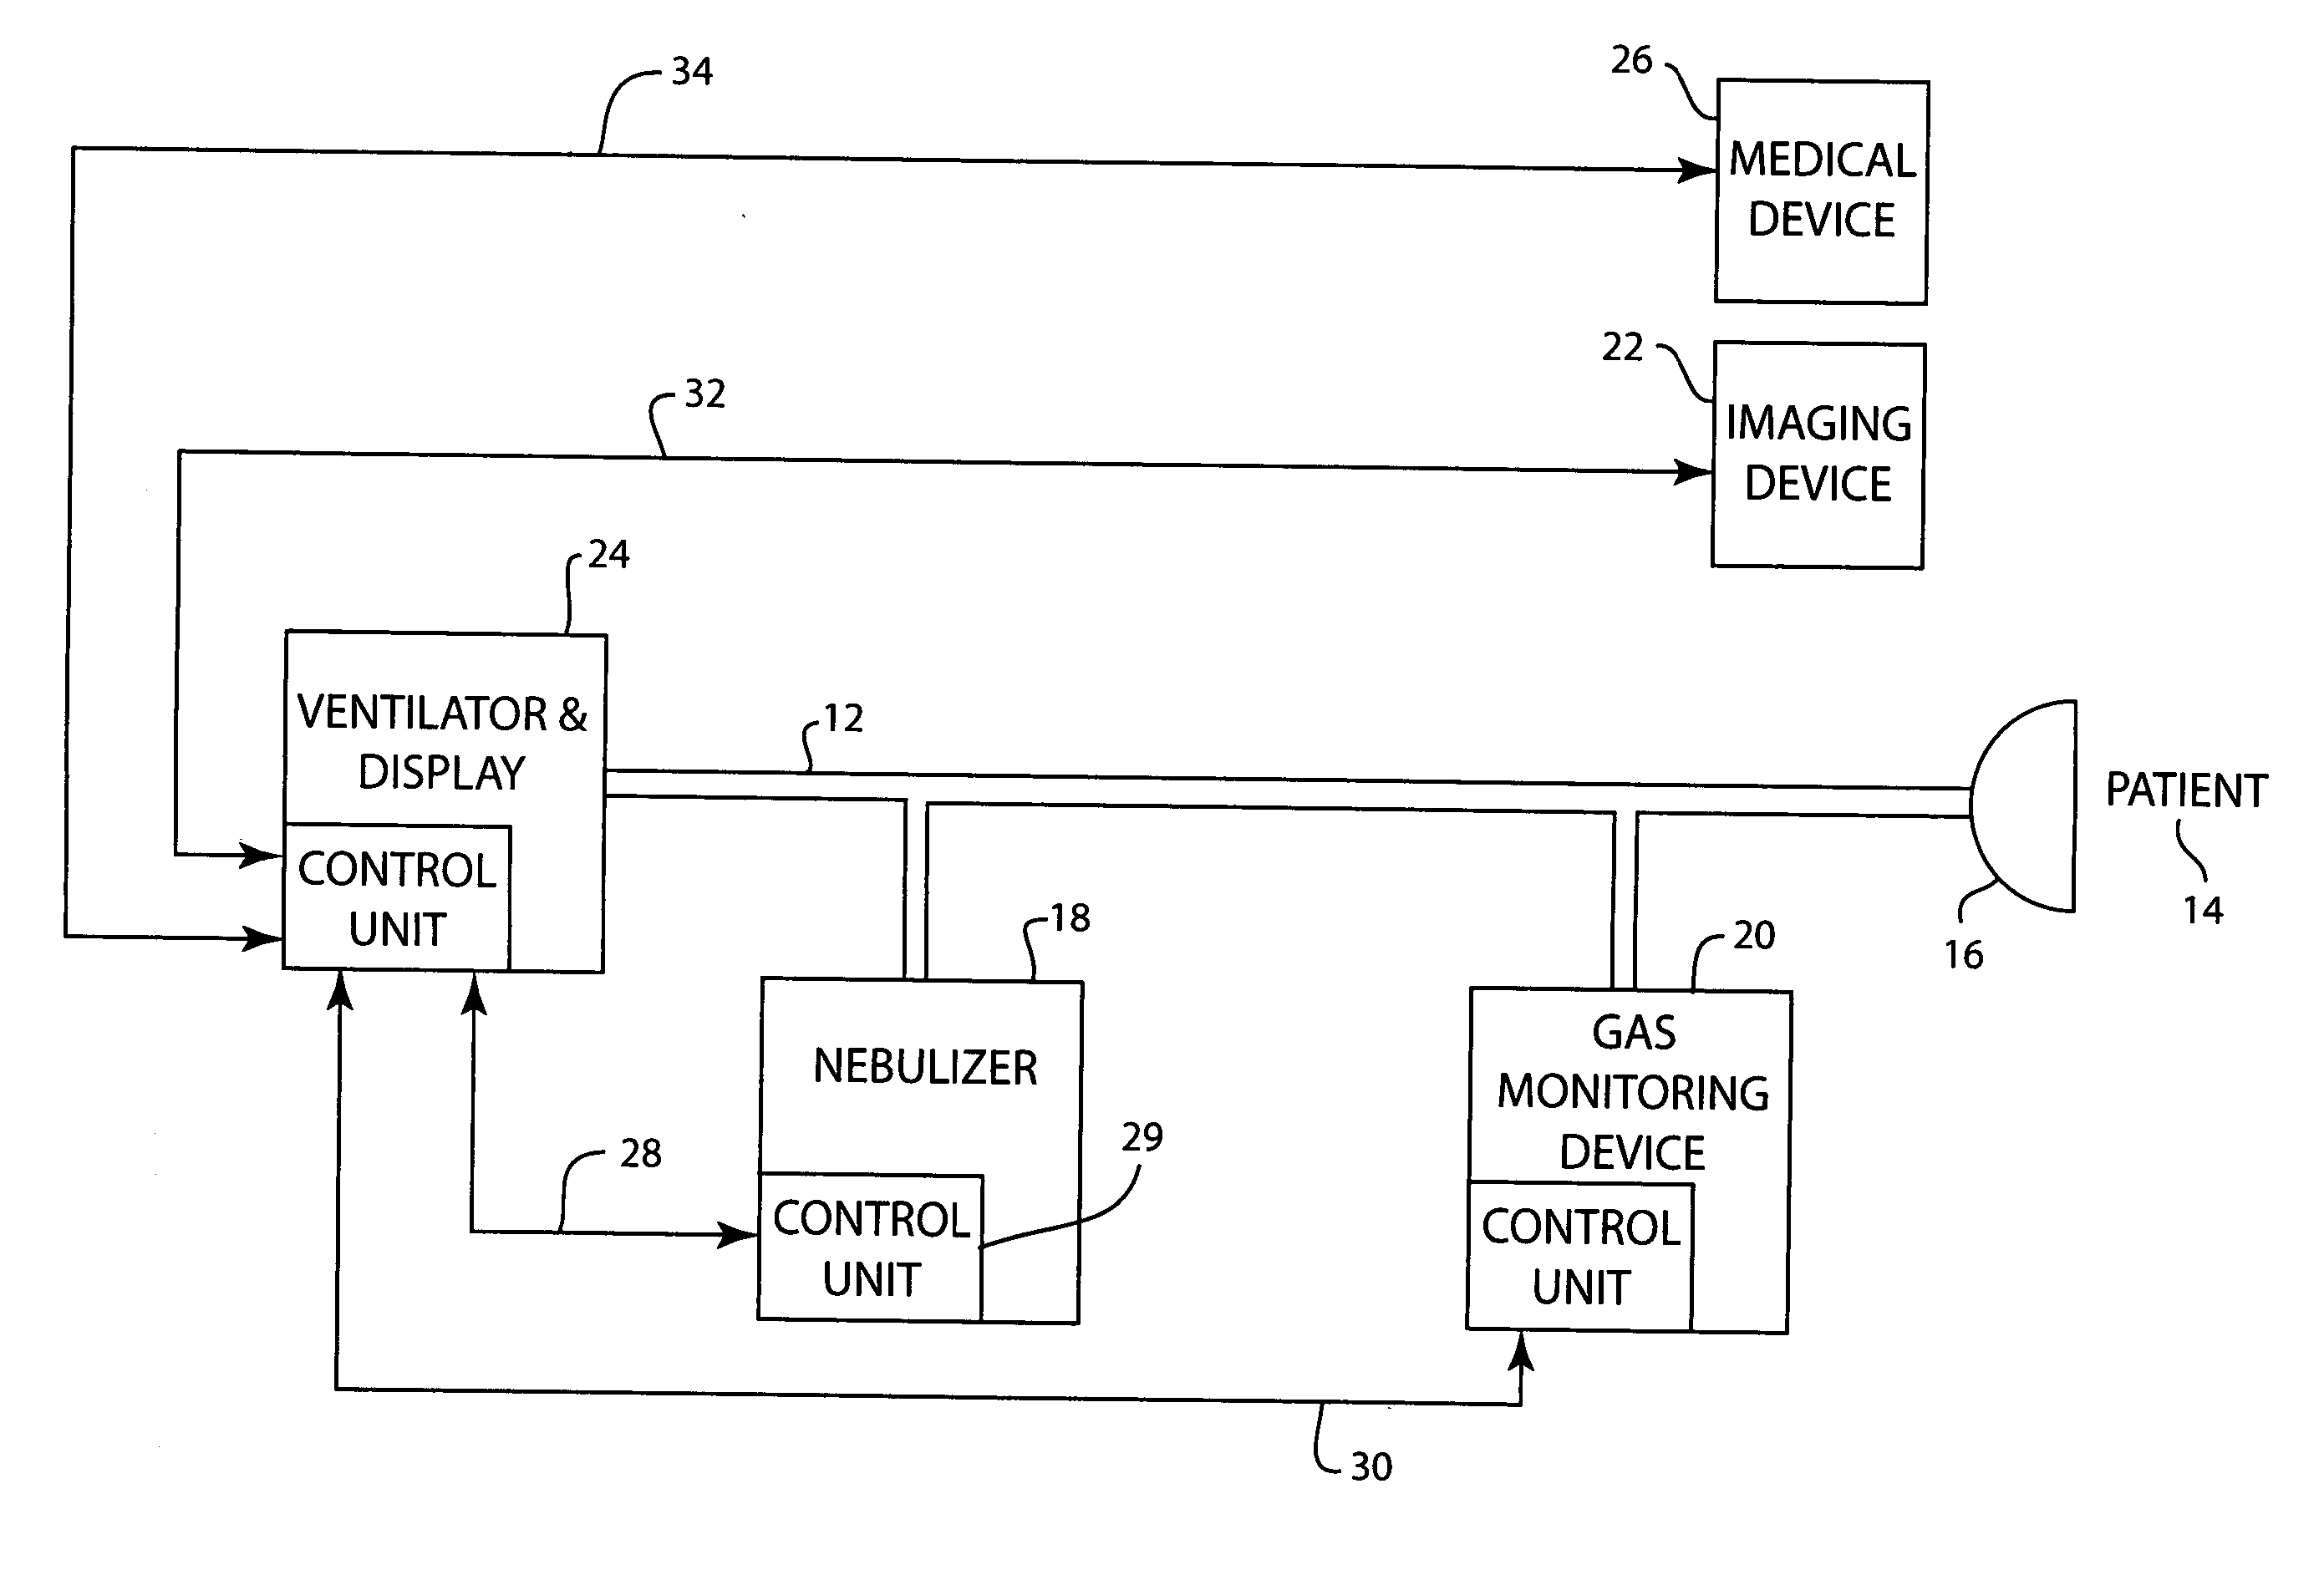 Method and system for integrating ventilator and medical device activities